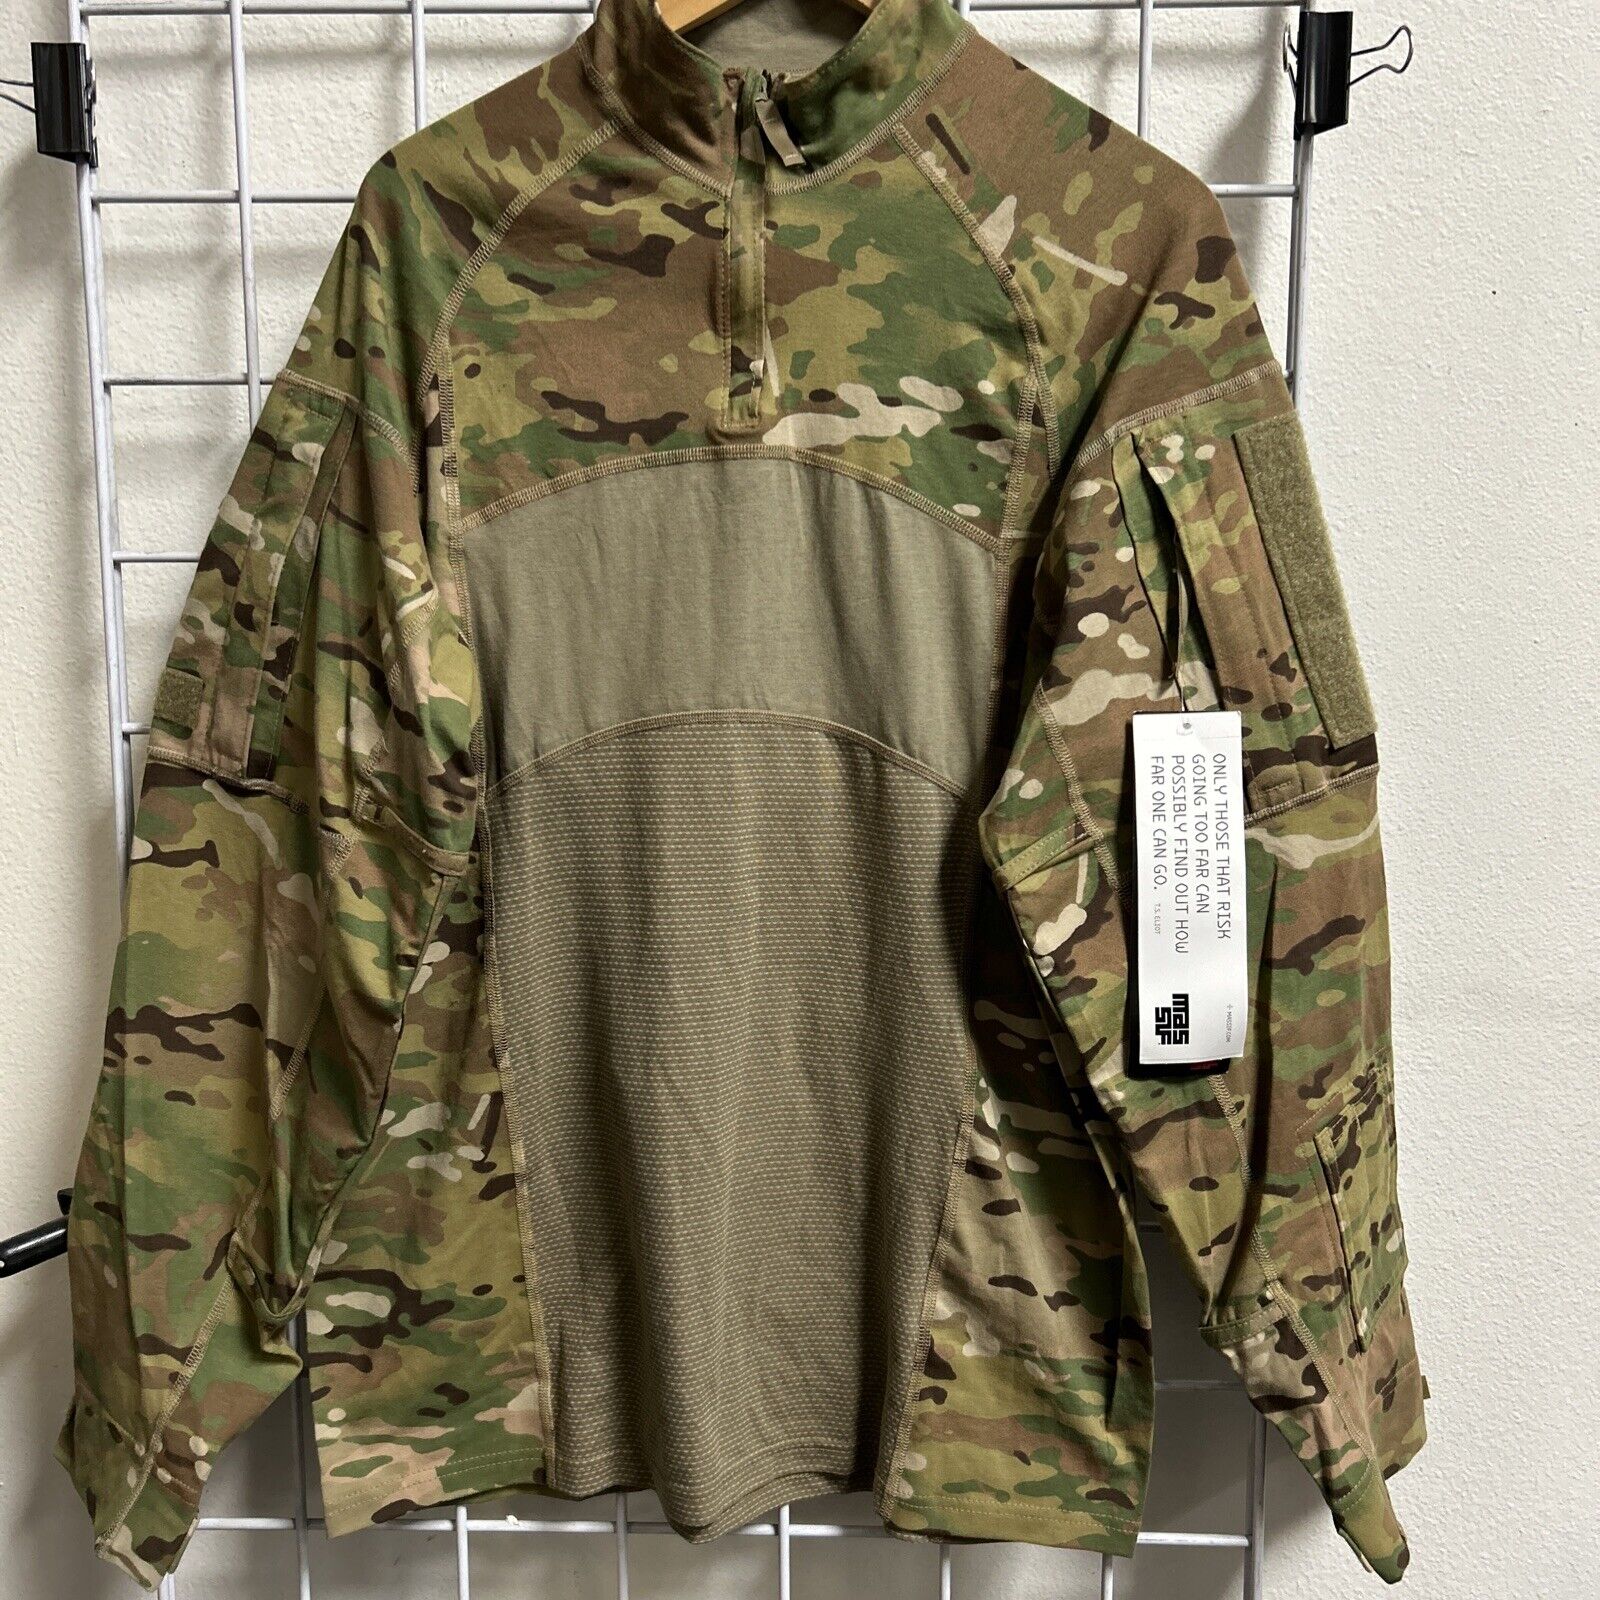 Army Combat Shirt Type II Flame Resistant ACS FR Multicam OCP size X- LARGE NWT